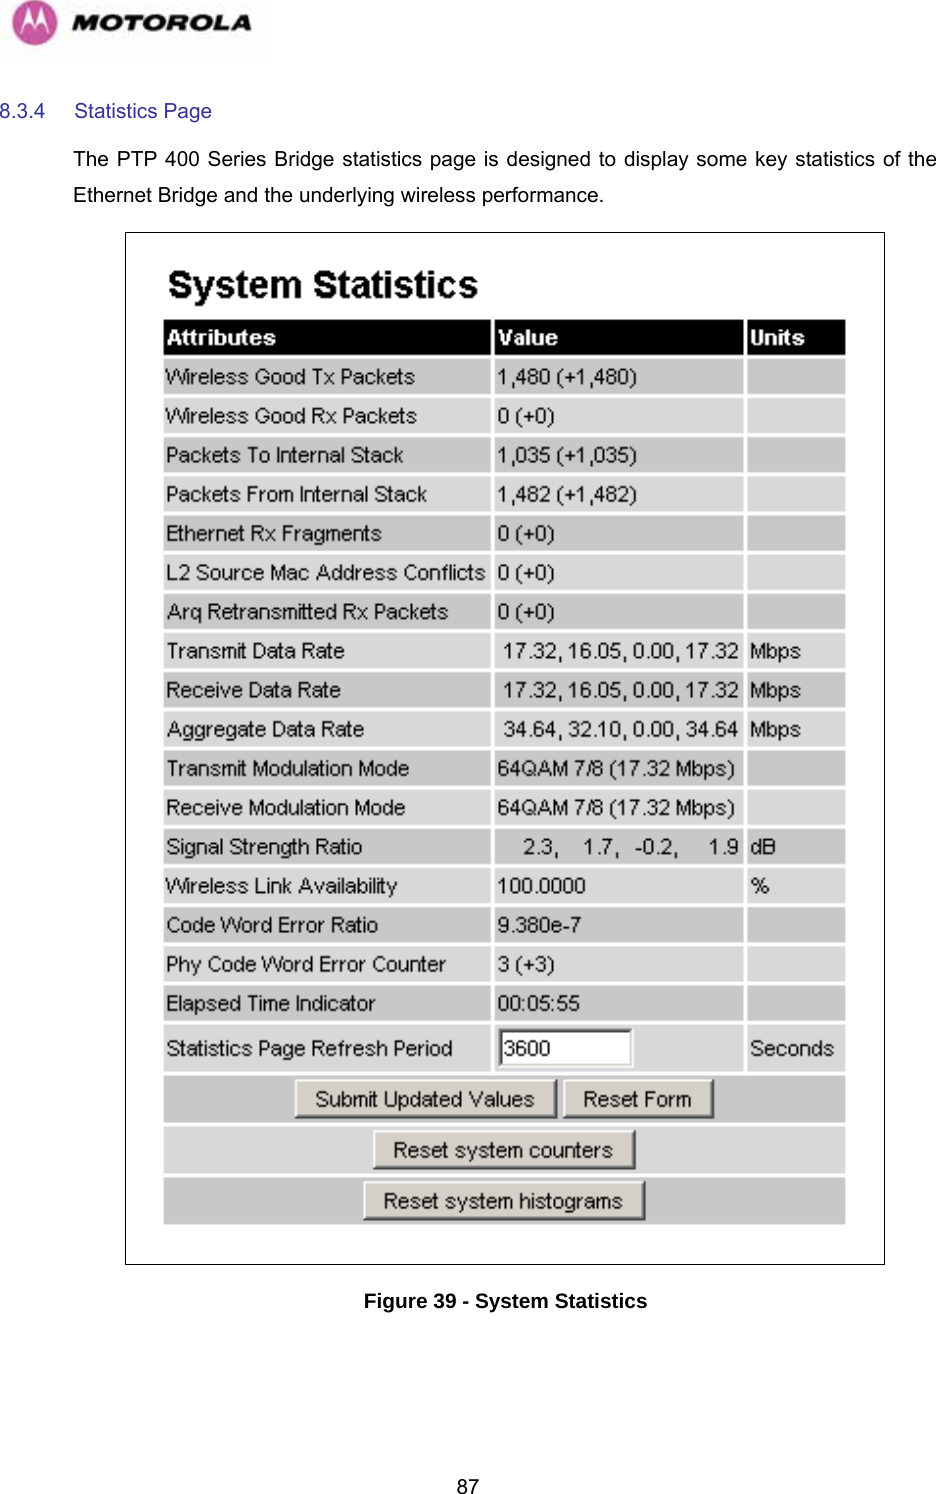   878.3.4  Statistics Page  The PTP 400 Series Bridge statistics page is designed to display some key statistics of the Ethernet Bridge and the underlying wireless performance.   Figure 39 - System Statistics 